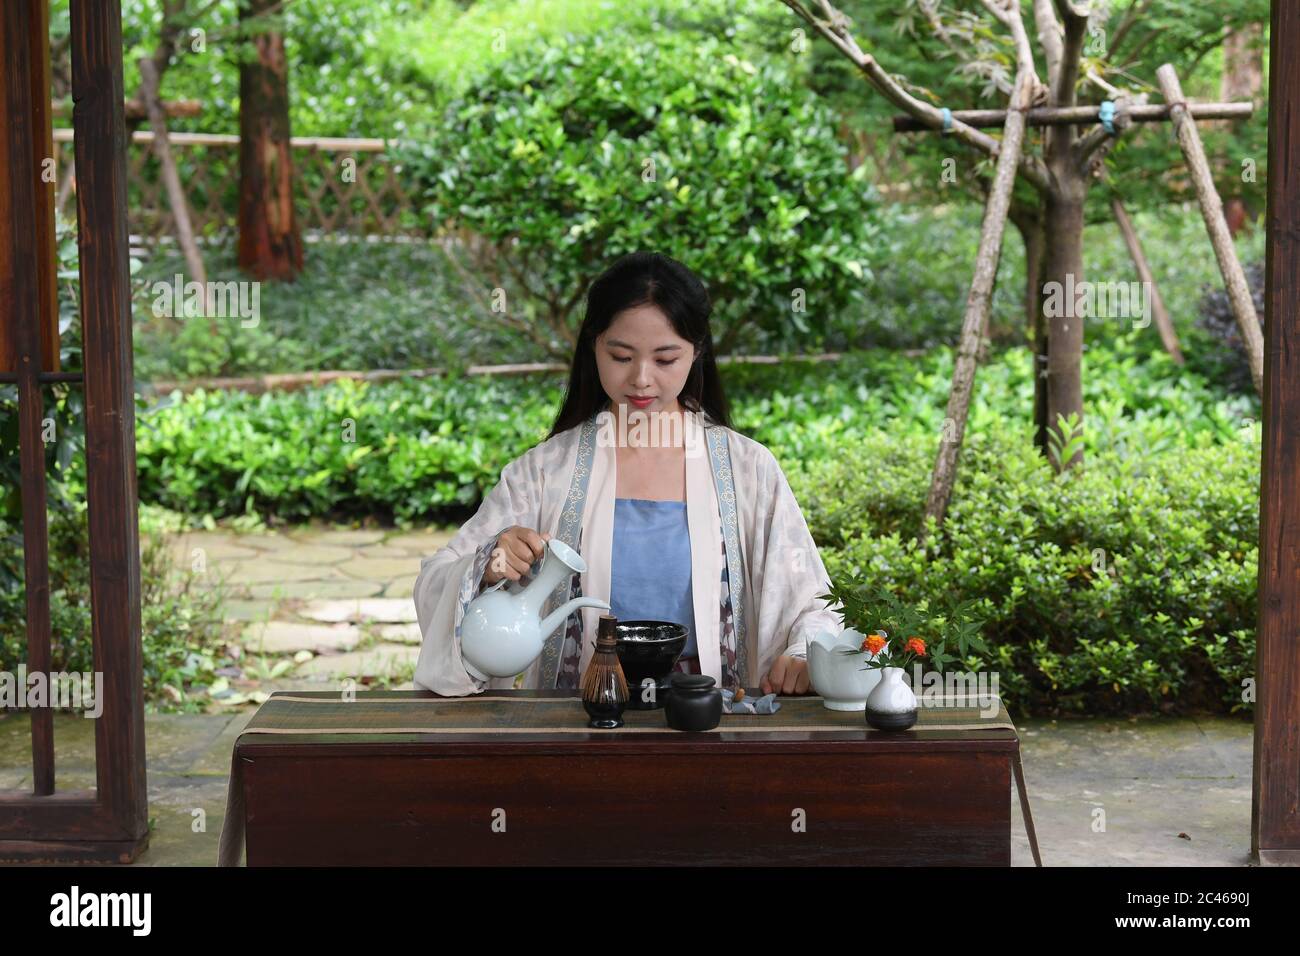 Hangzhou, East China's Zhejiang Province. 23rd June, 2020. Zhou Ying, a local tea master, demonstrates the Jingshan tea ceremony in Jingshan Town, Hangzhou, East China's Zhejiang Province, June 23, 2020. Located in northwest of Hangzhou, Jingshan Temple was once famous for its tea ceremony that was even exported to Japan during the period of 1127 to 1279. Today, the locals are working hard to restructure the temple, bringing out revival of the tea ceremony. Credit: Weng Xinyang/Xinhua/Alamy Live News Stock Photo